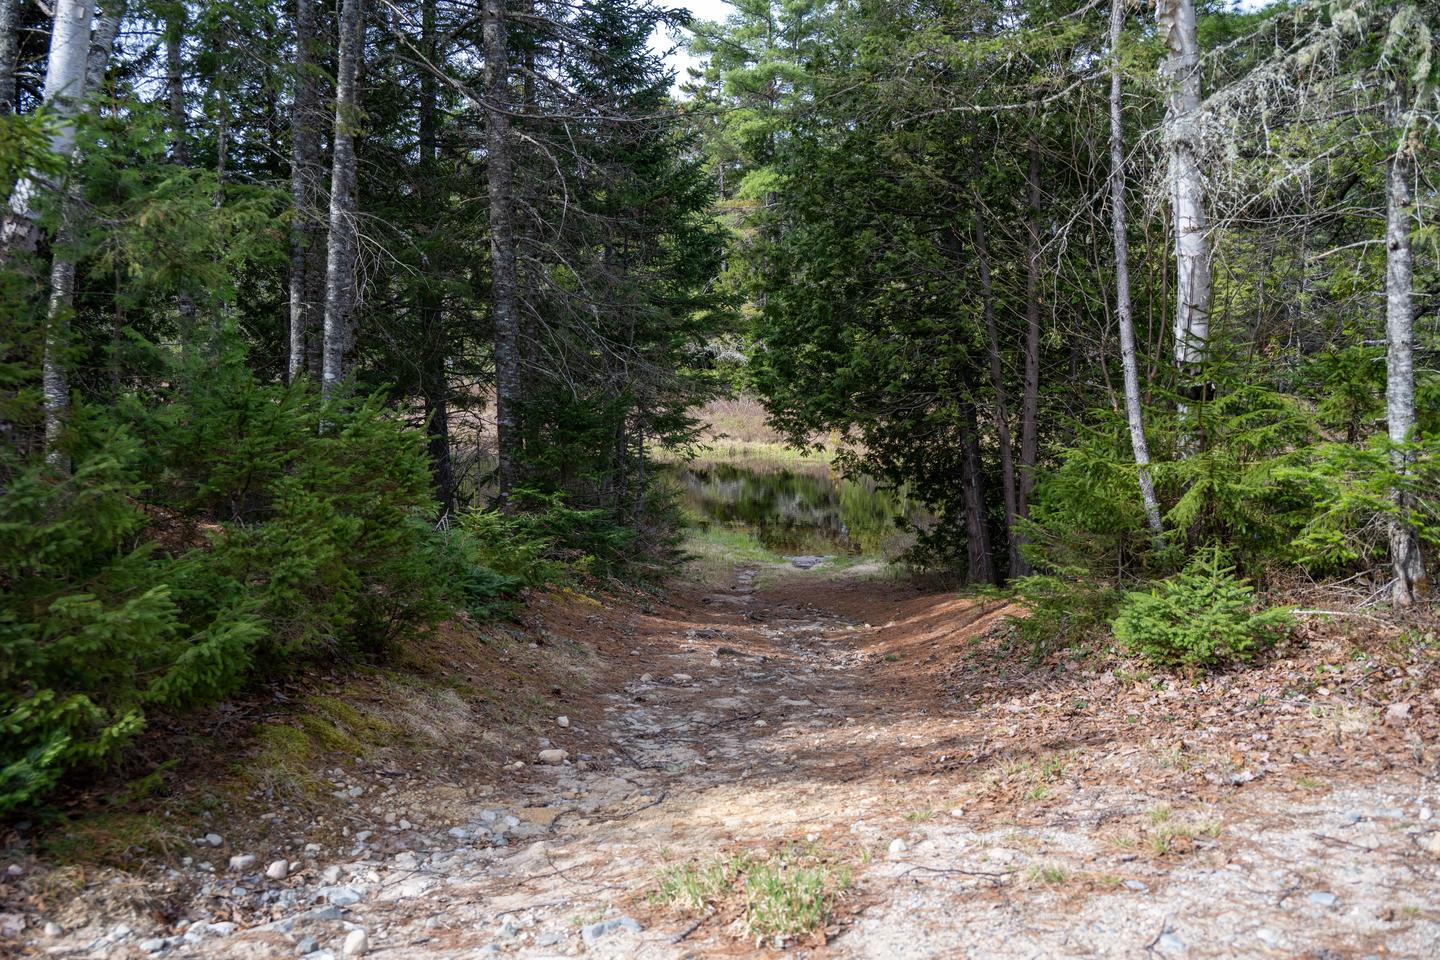 A short, uneven, and rocky trail to the viewpoint of Sandbank Stream.There are a couple short trails at the campsite to view the wetland area.